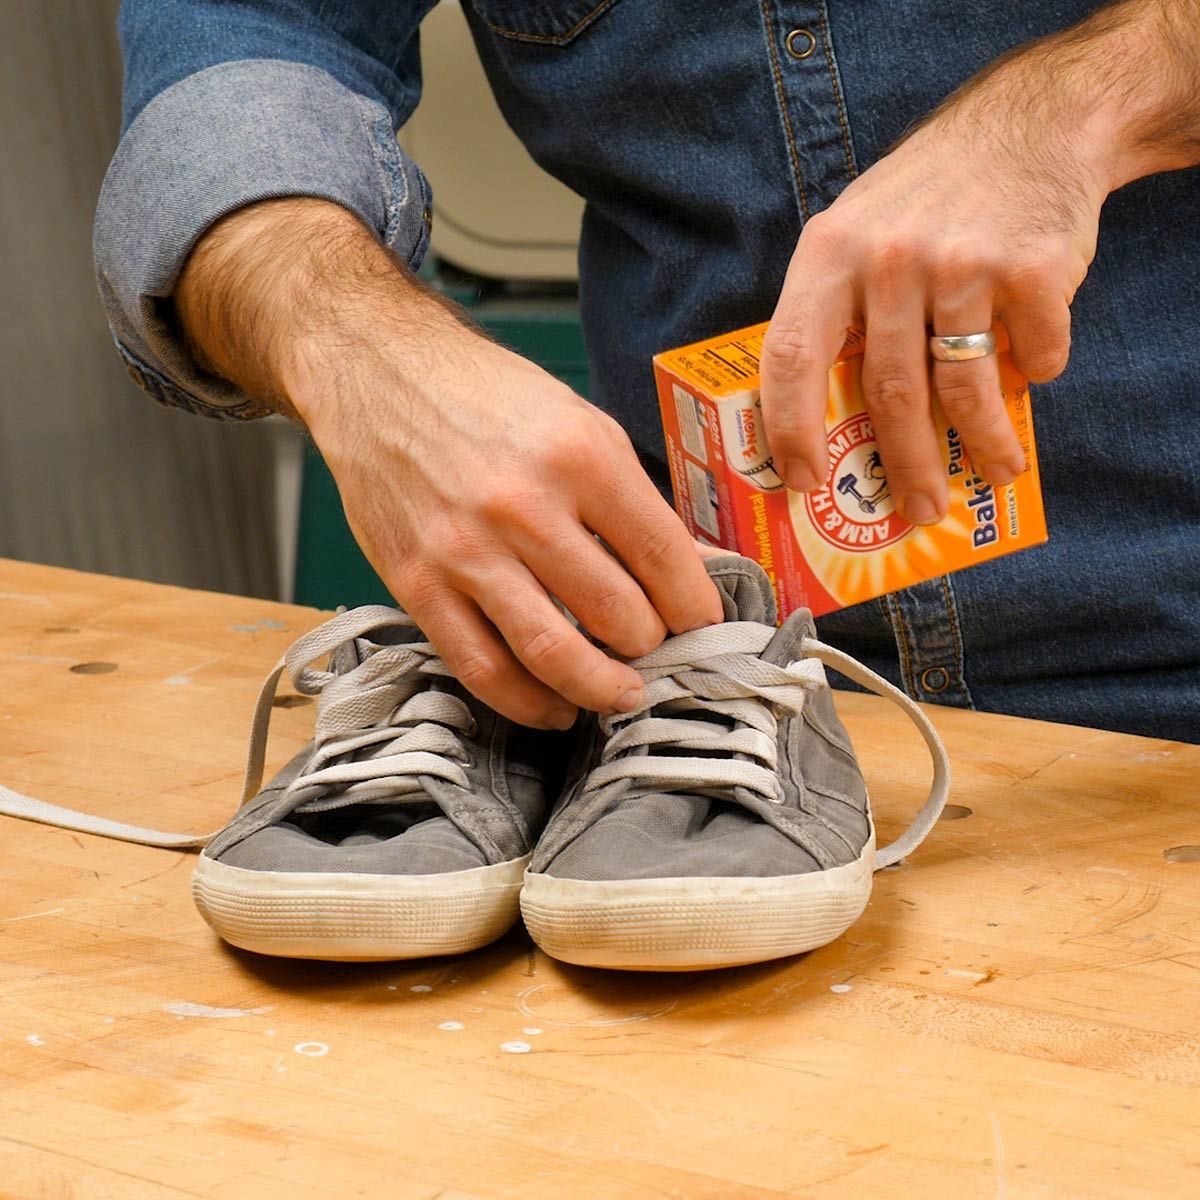 Anti-confusion!  This is a simple way to get rid of the smell in shoes 